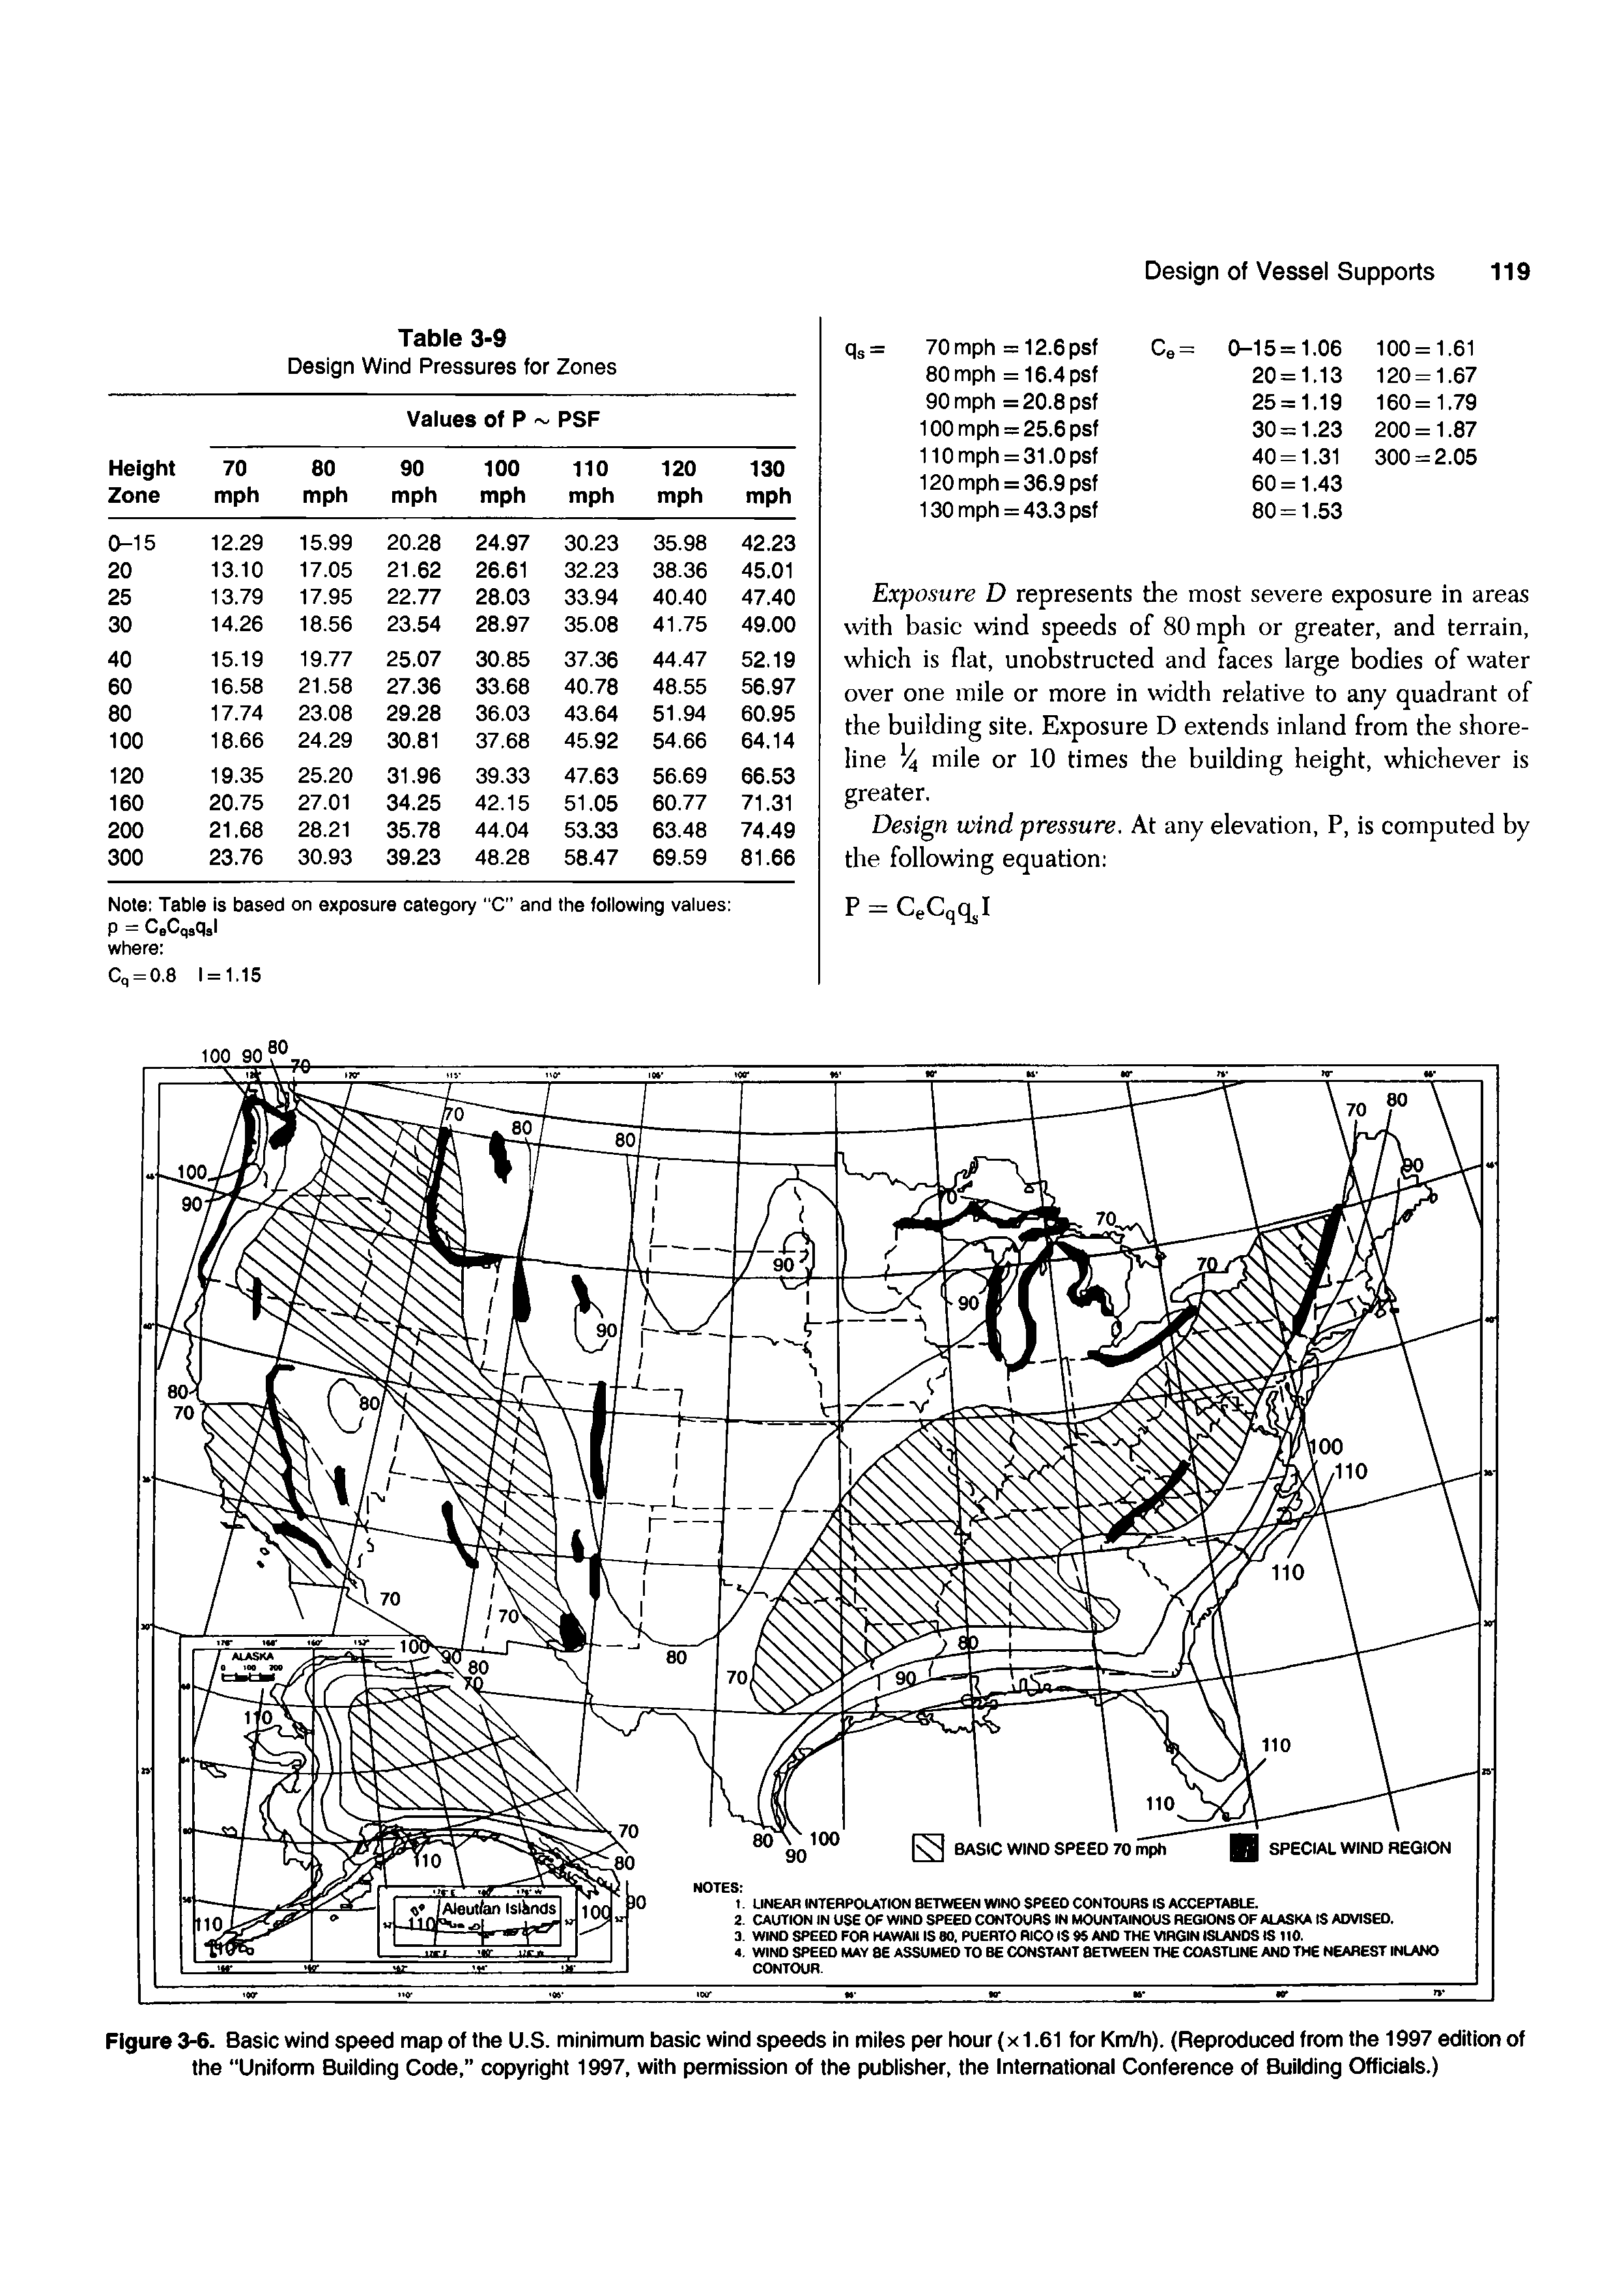 Figure 3-6. Basic wind speed map of the U.S. minimum basic wind speeds in miles per hour (x 1.61 for Km/h). (Reproduced from the 1997 edition of the "Uniform Building Code, copyright 1997, with permission of the publisher, the International Conference of Building Officials.)...